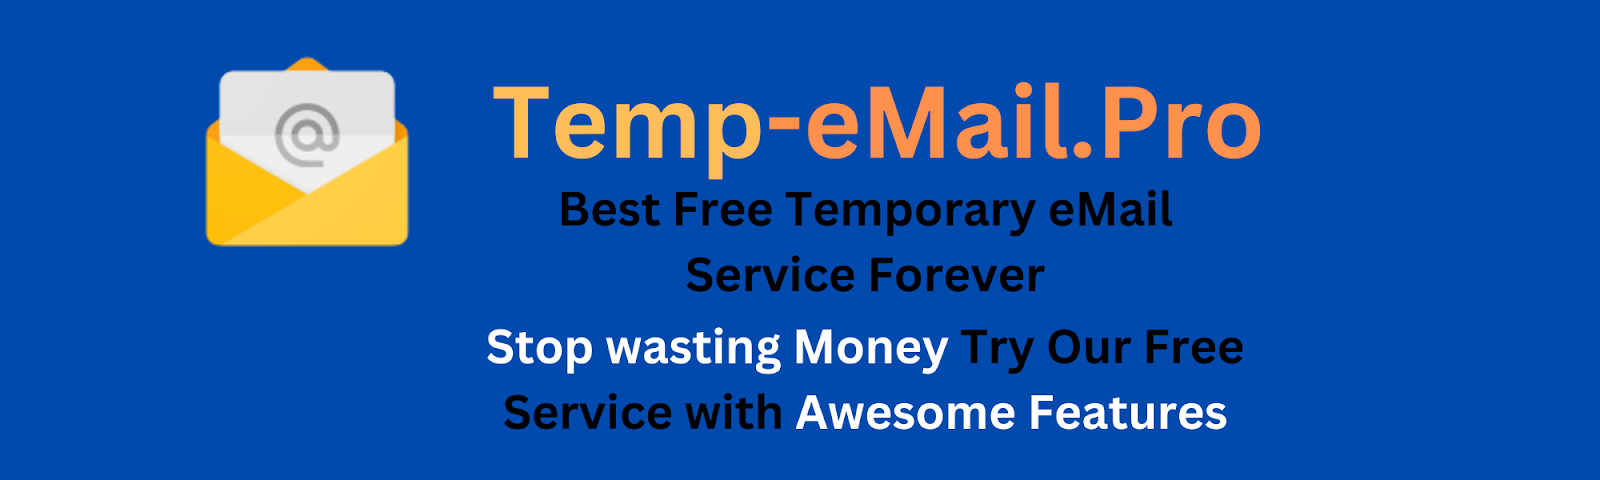 bed Temp-eMail.Pro

Stop wasting Money
Awesome Features